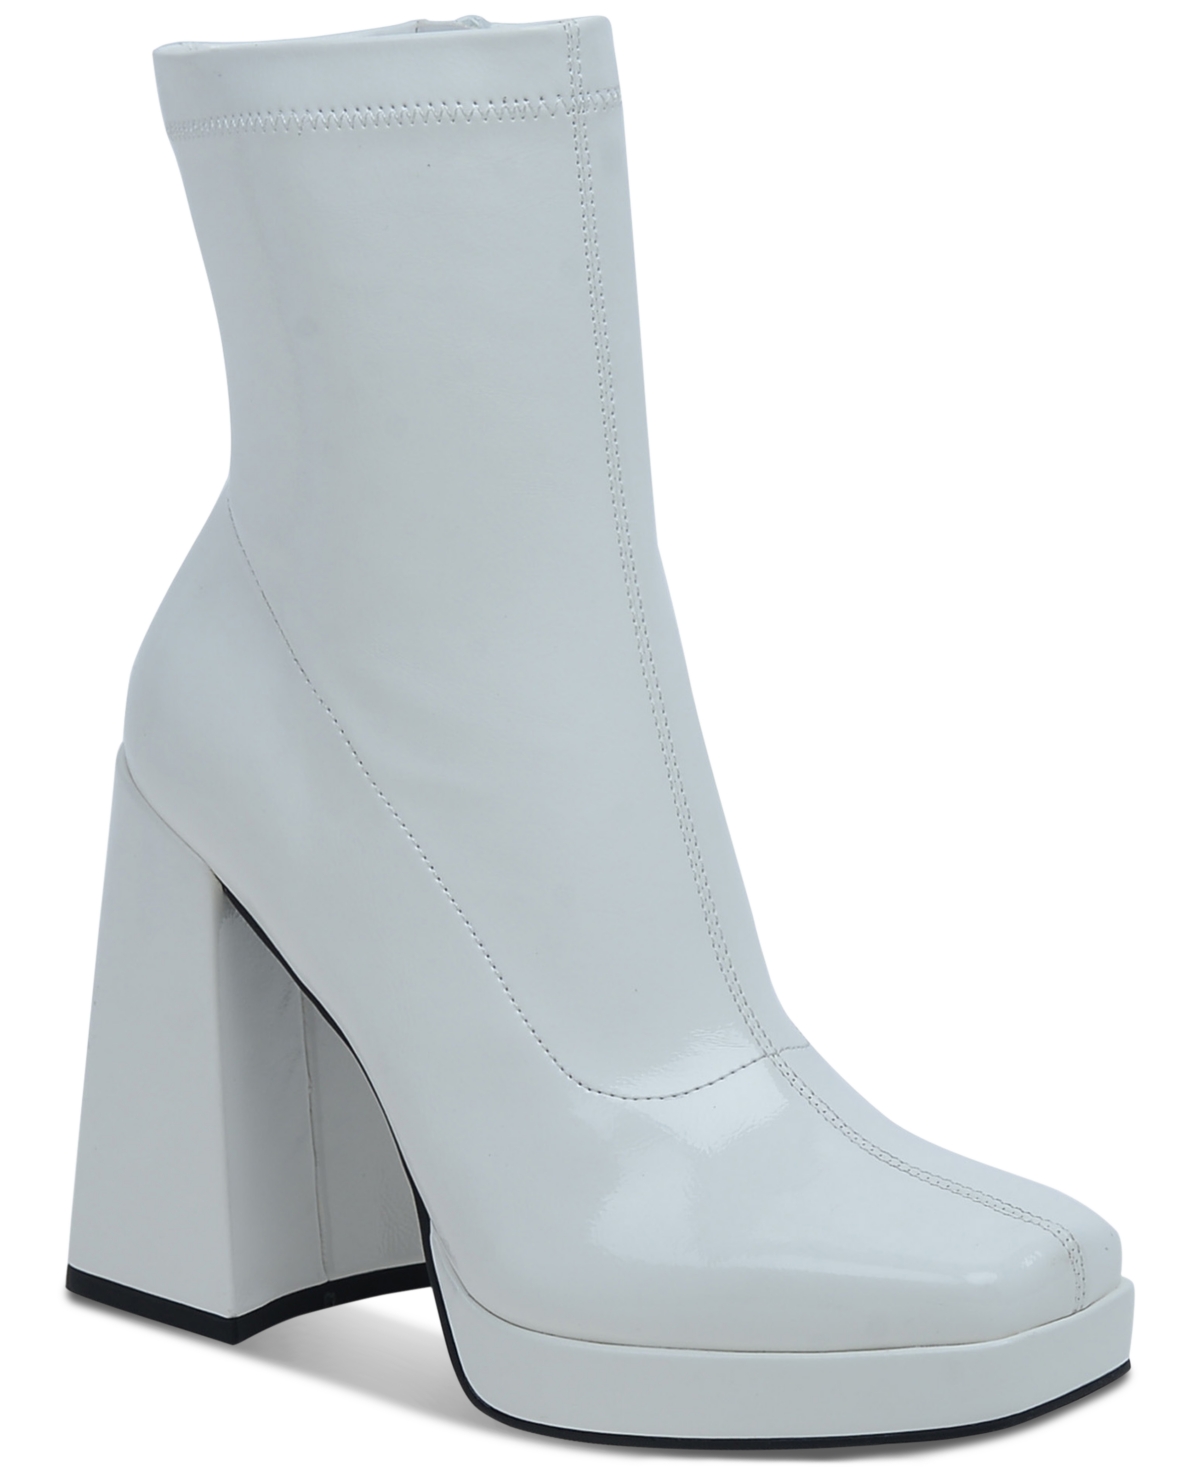 Beautee Platform Booties, Created for Macy's - White Patent